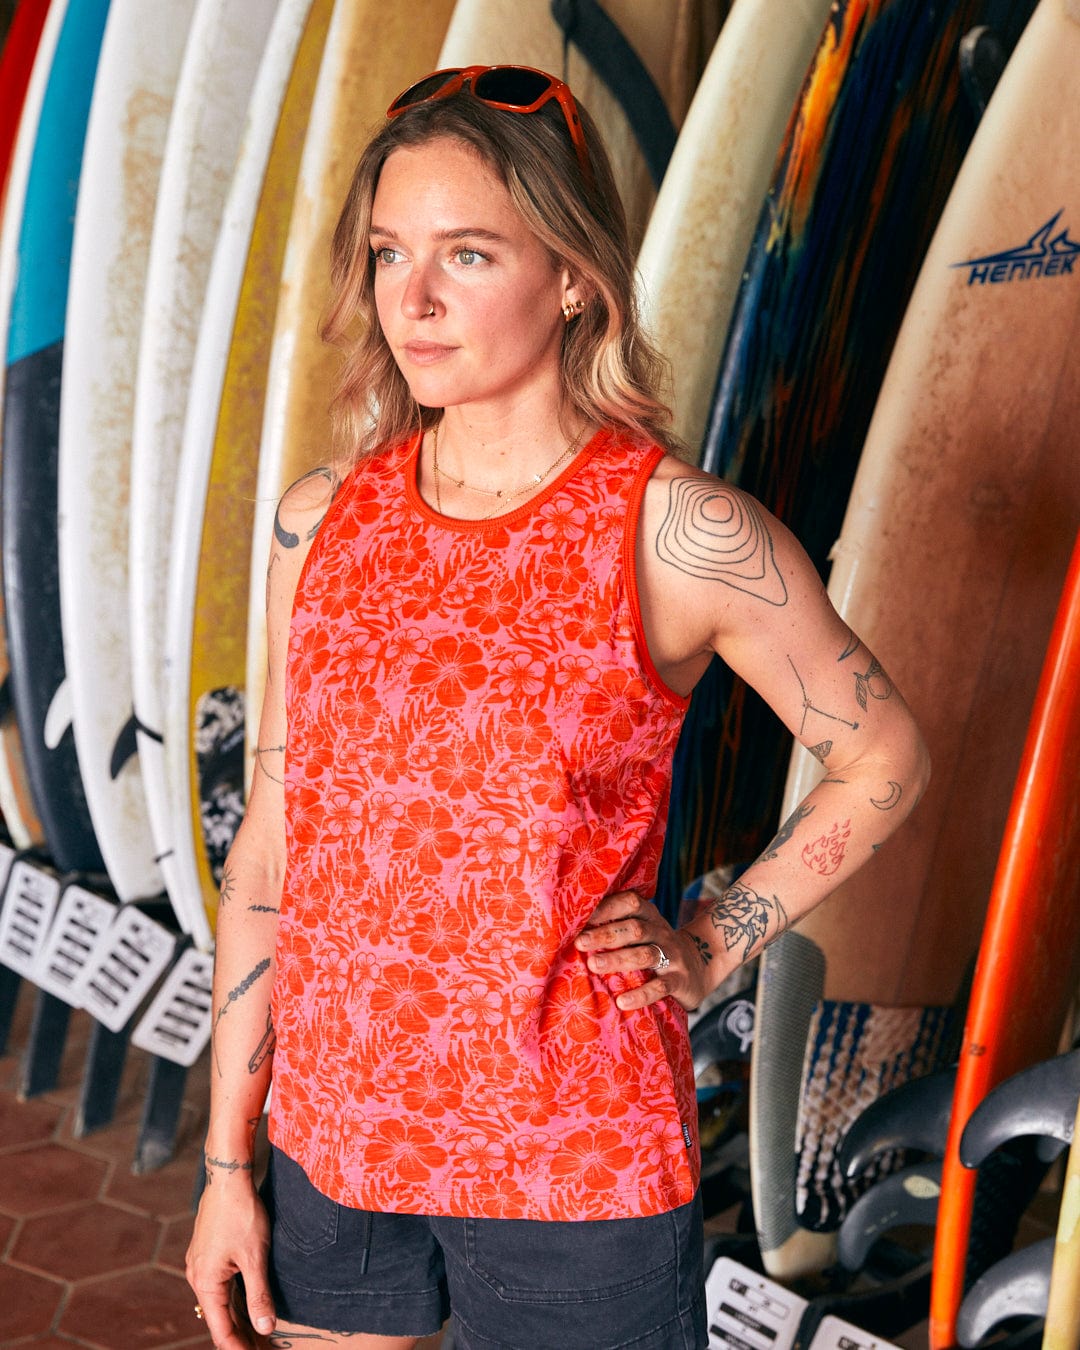 A woman stands in front of a rack of surfboards, wearing a Saltrock Hibiscus - Womens Vest - Red and black shorts, one hand on her hip. She has sunglasses perched on her head and various tattoos on her arms.